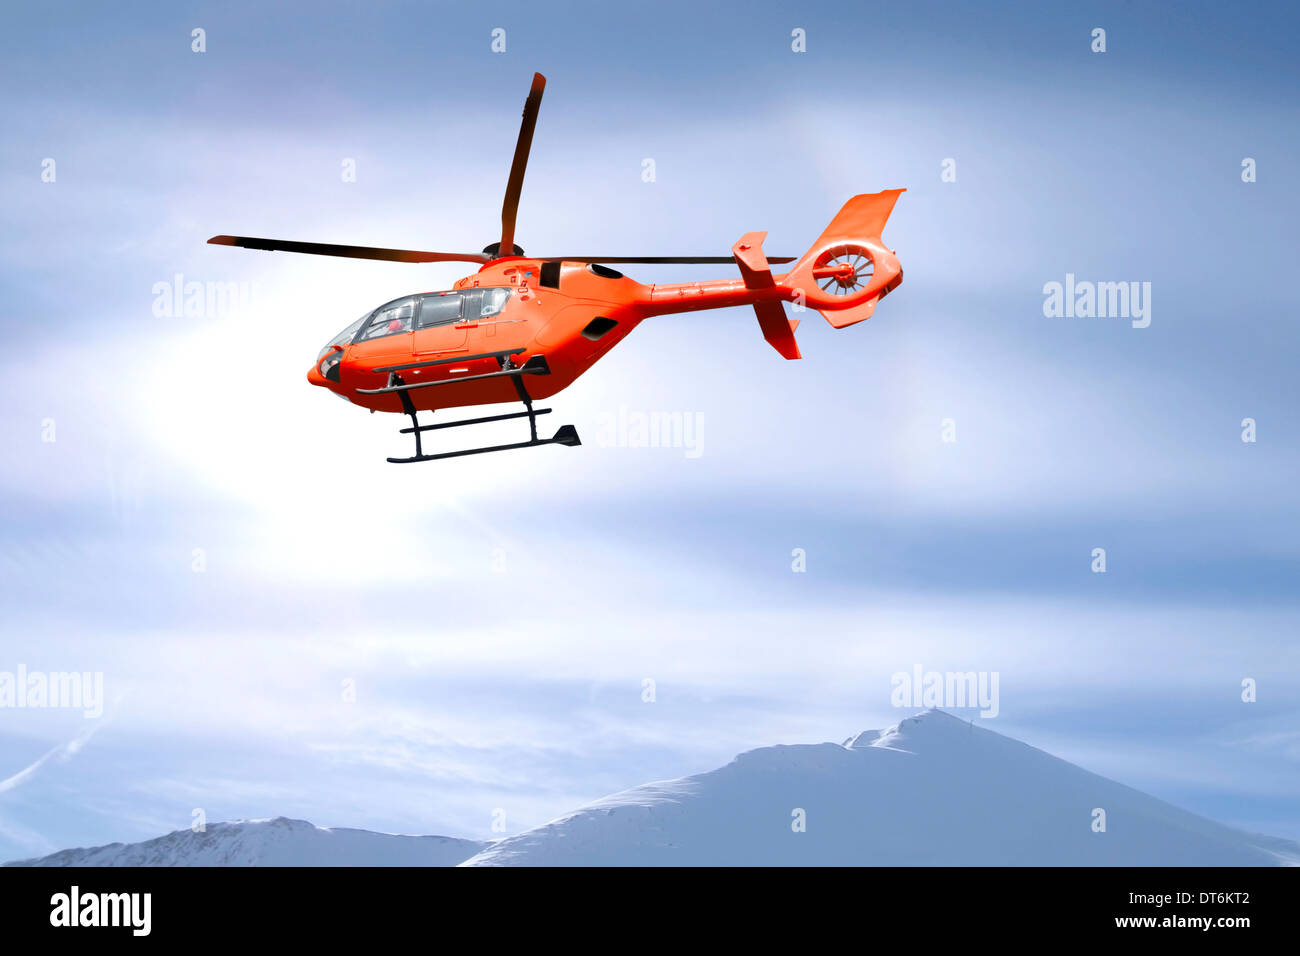 Red helicopter flies over snow capped mountain summits Stock Photo